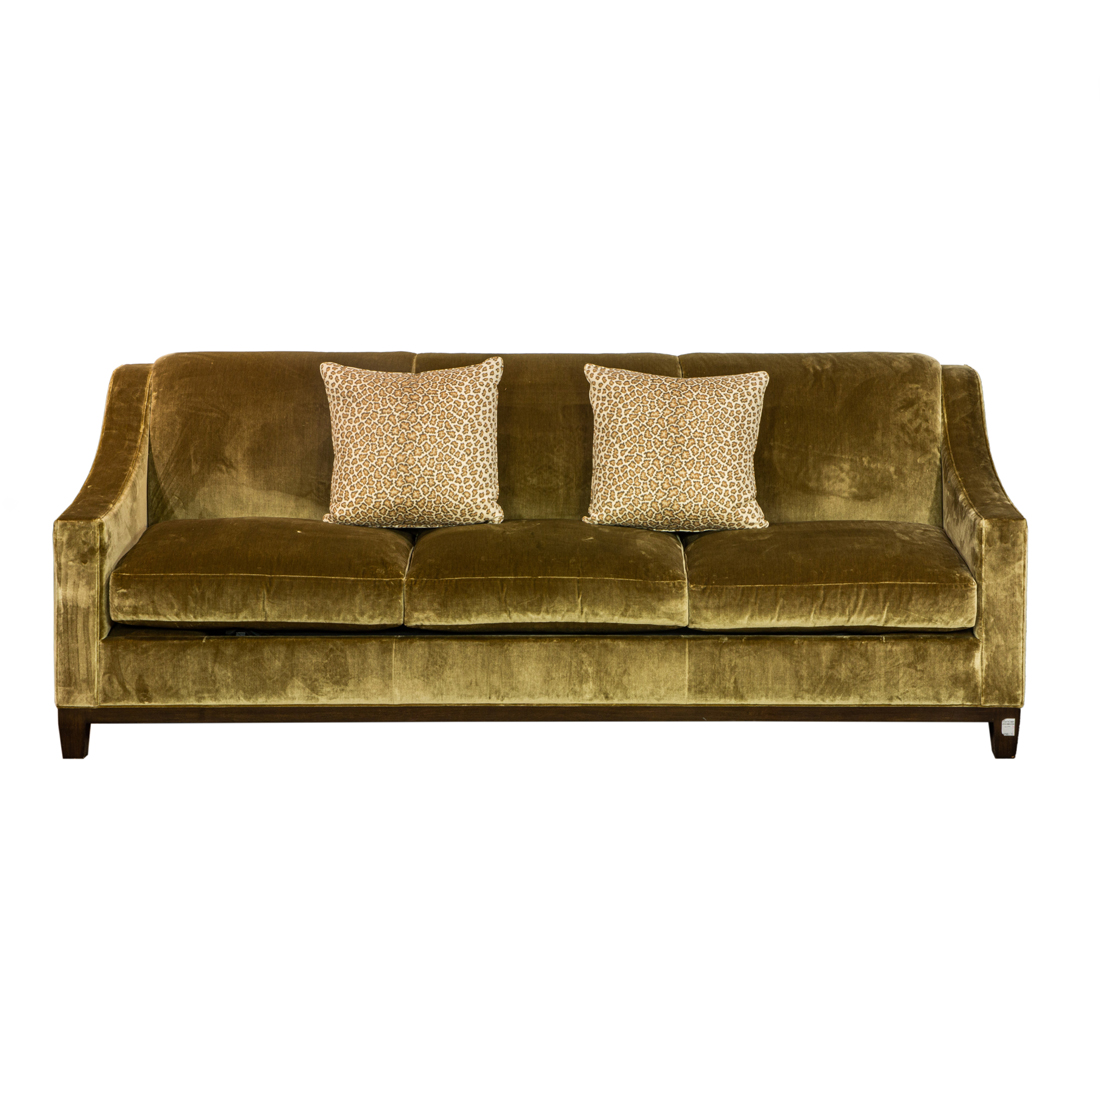 A CONTEMPORARY OLIVE GREEN VELVET 3a1304